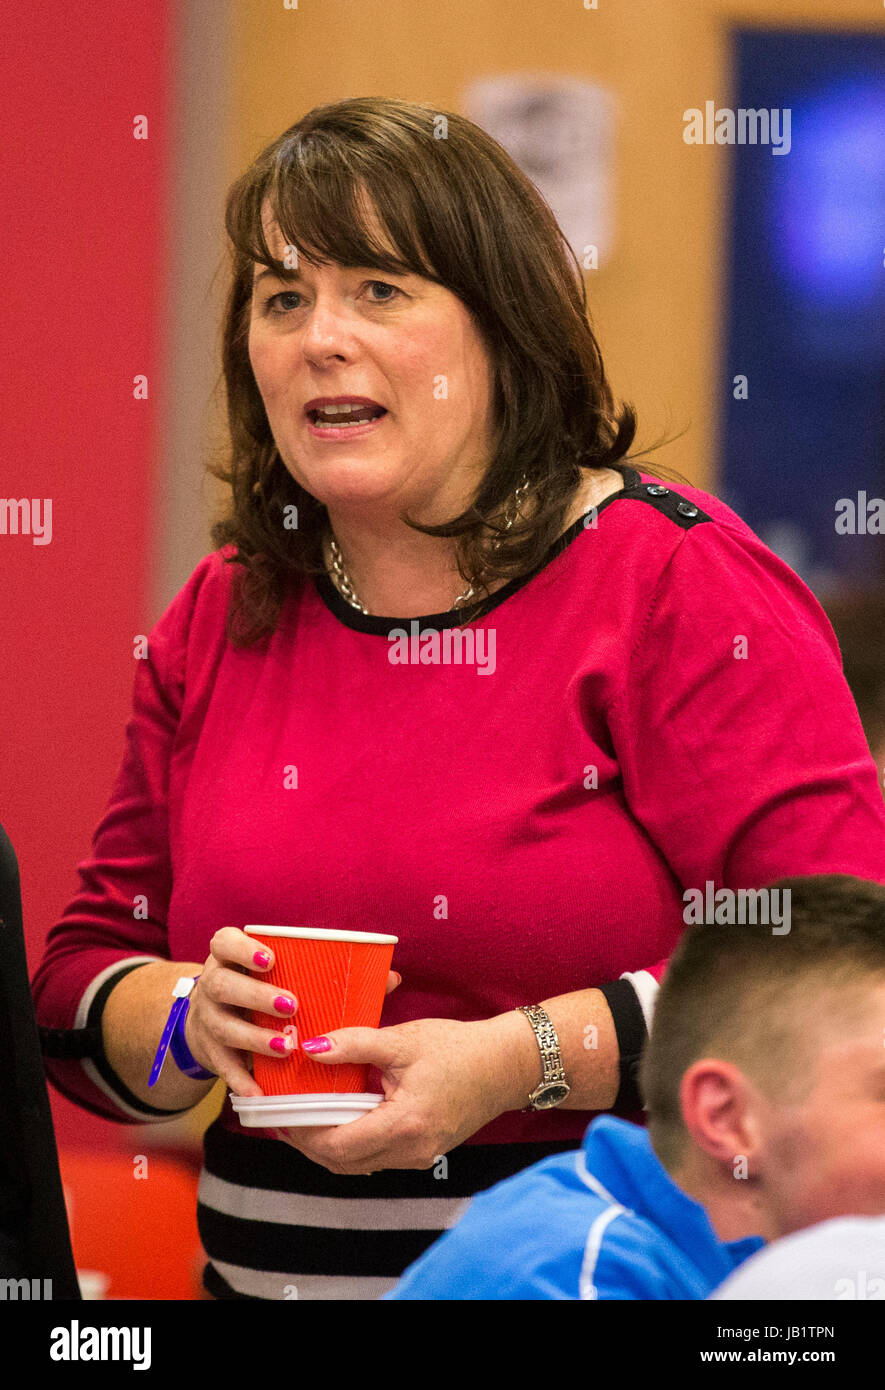 Fermanagh & South Tyrone candidate Michelle Gildernew at Omagh Leisure Complex where votes are being counted for the 2017 Westminster Election. Stock Photo